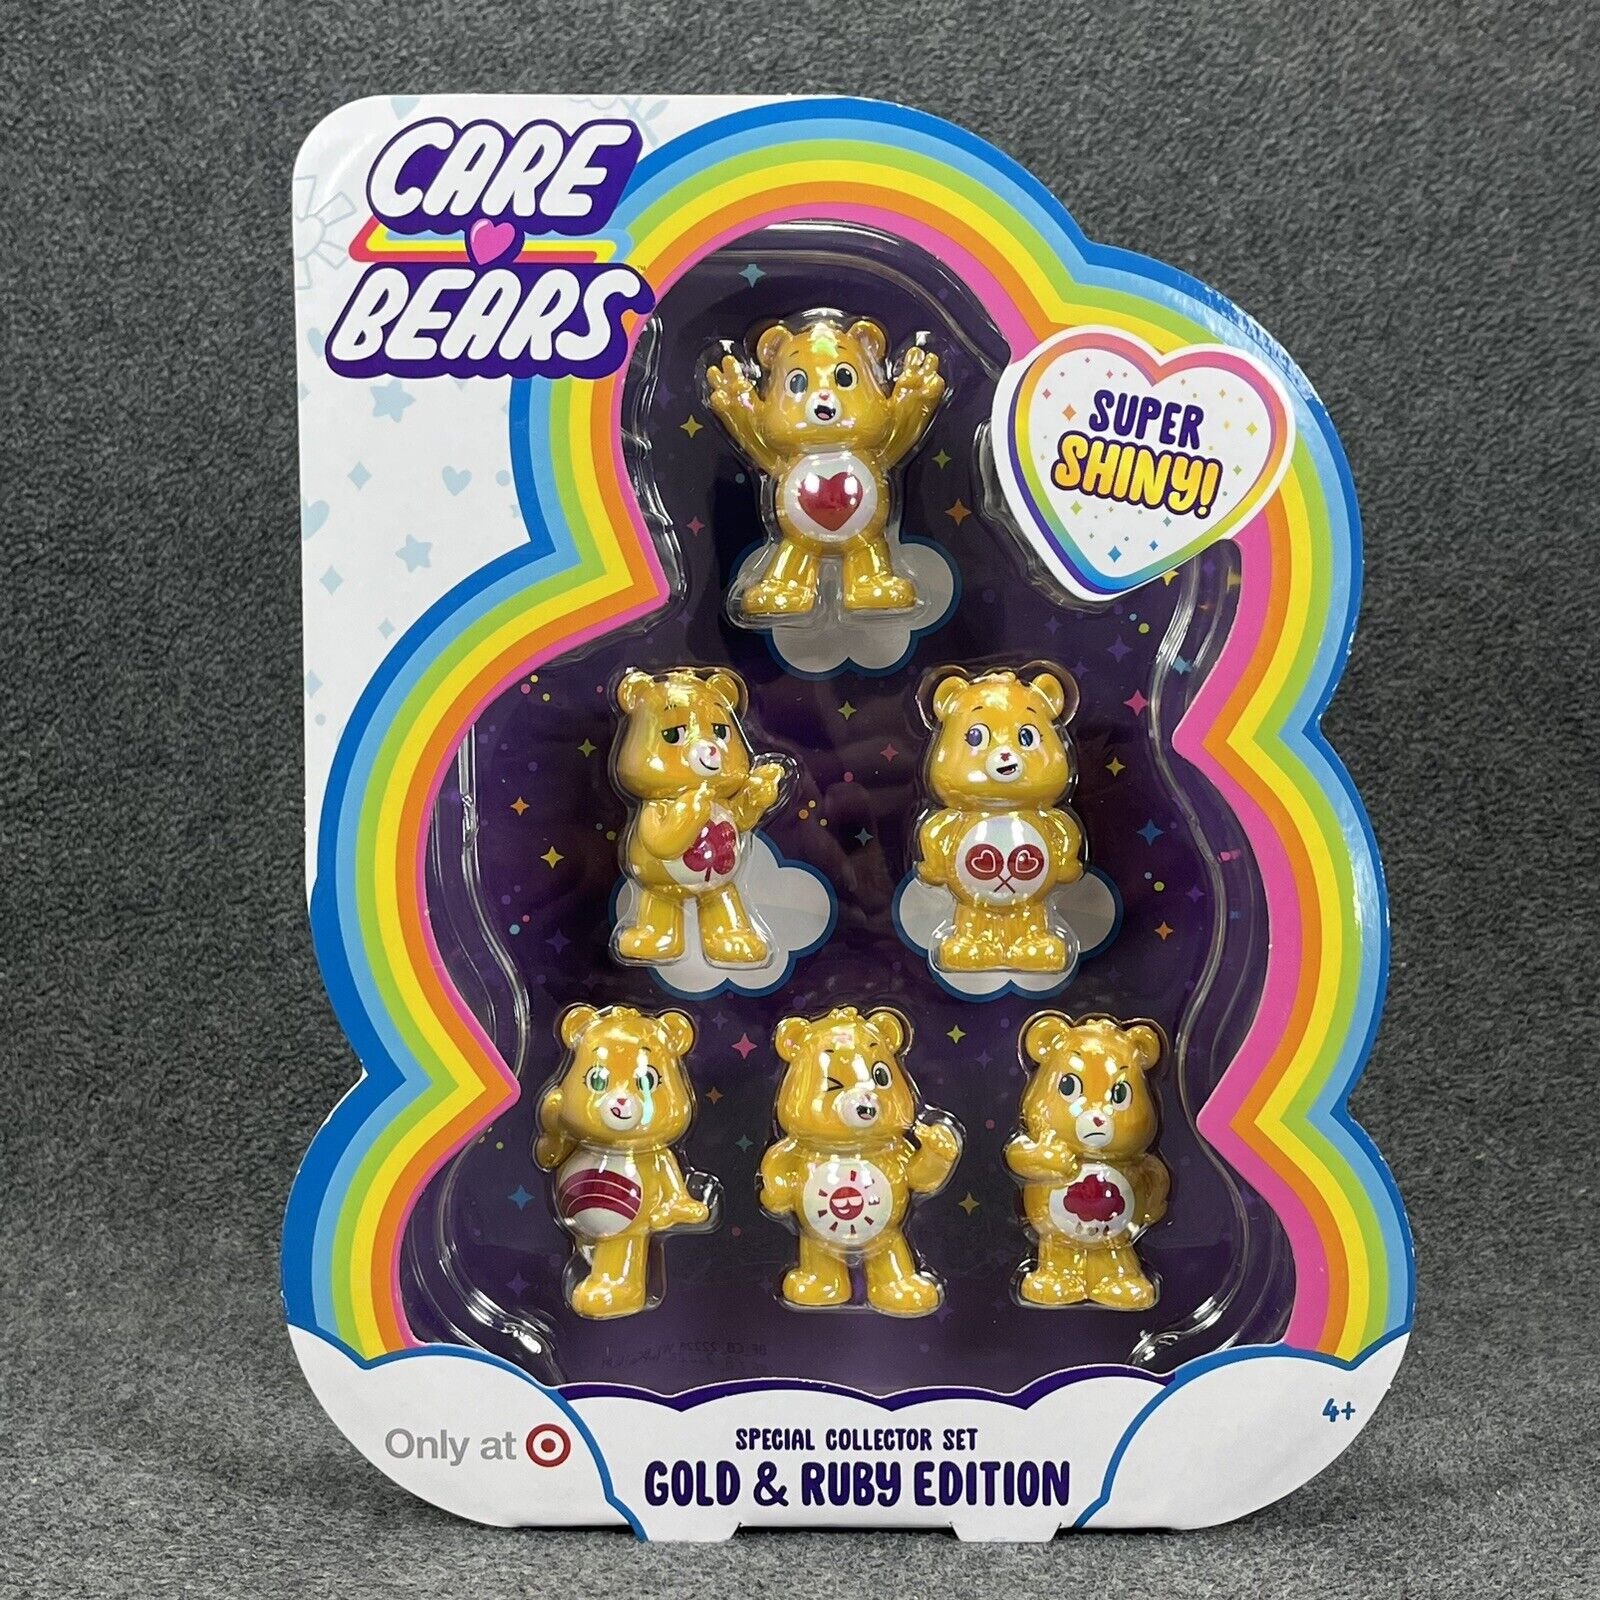 Care Bears Special Collector Set Gold & Ruby Edition Super Shiny 2\